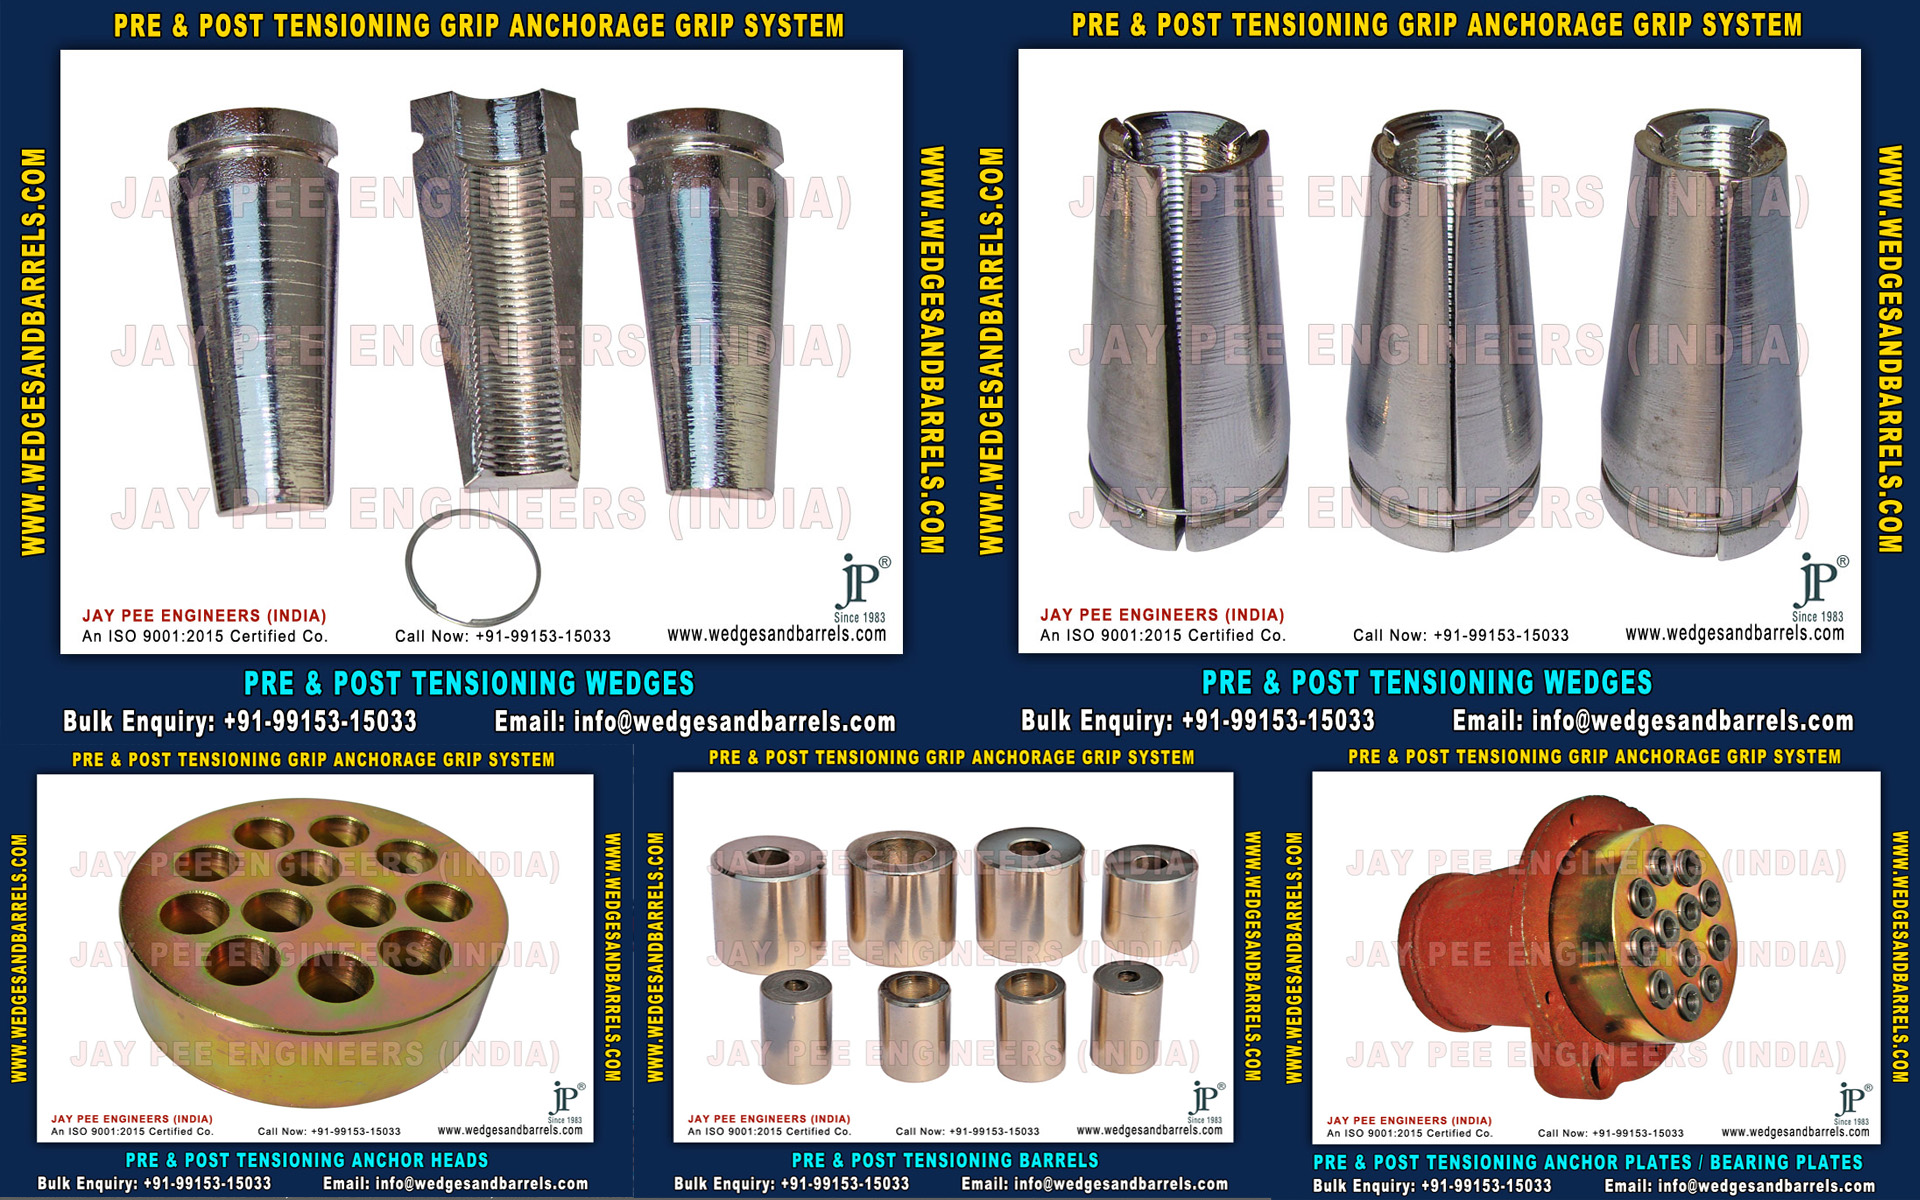 Post Tensioning wedges and barrels, pre stressed anchor grip system, anchor heads plates manufacturers exportersManufacturers and ExportersIndustrial SuppliesAll Indiaother